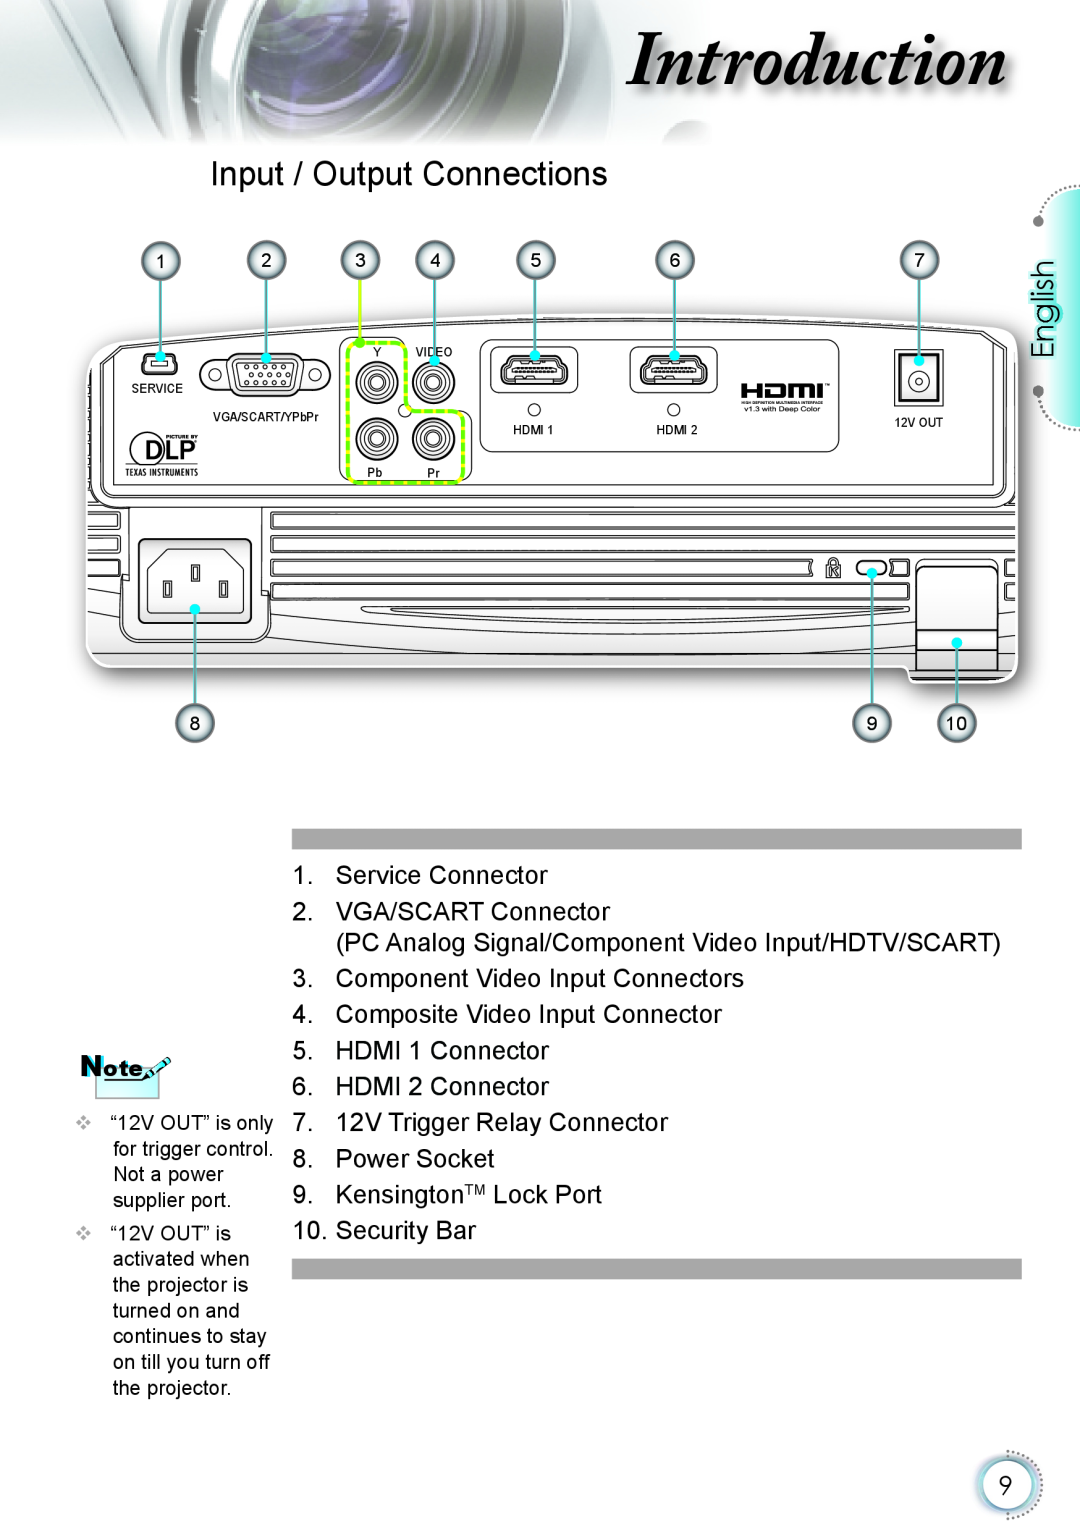 Optoma Technology HD20 manual Input / Output Connections, ntroduction, English 